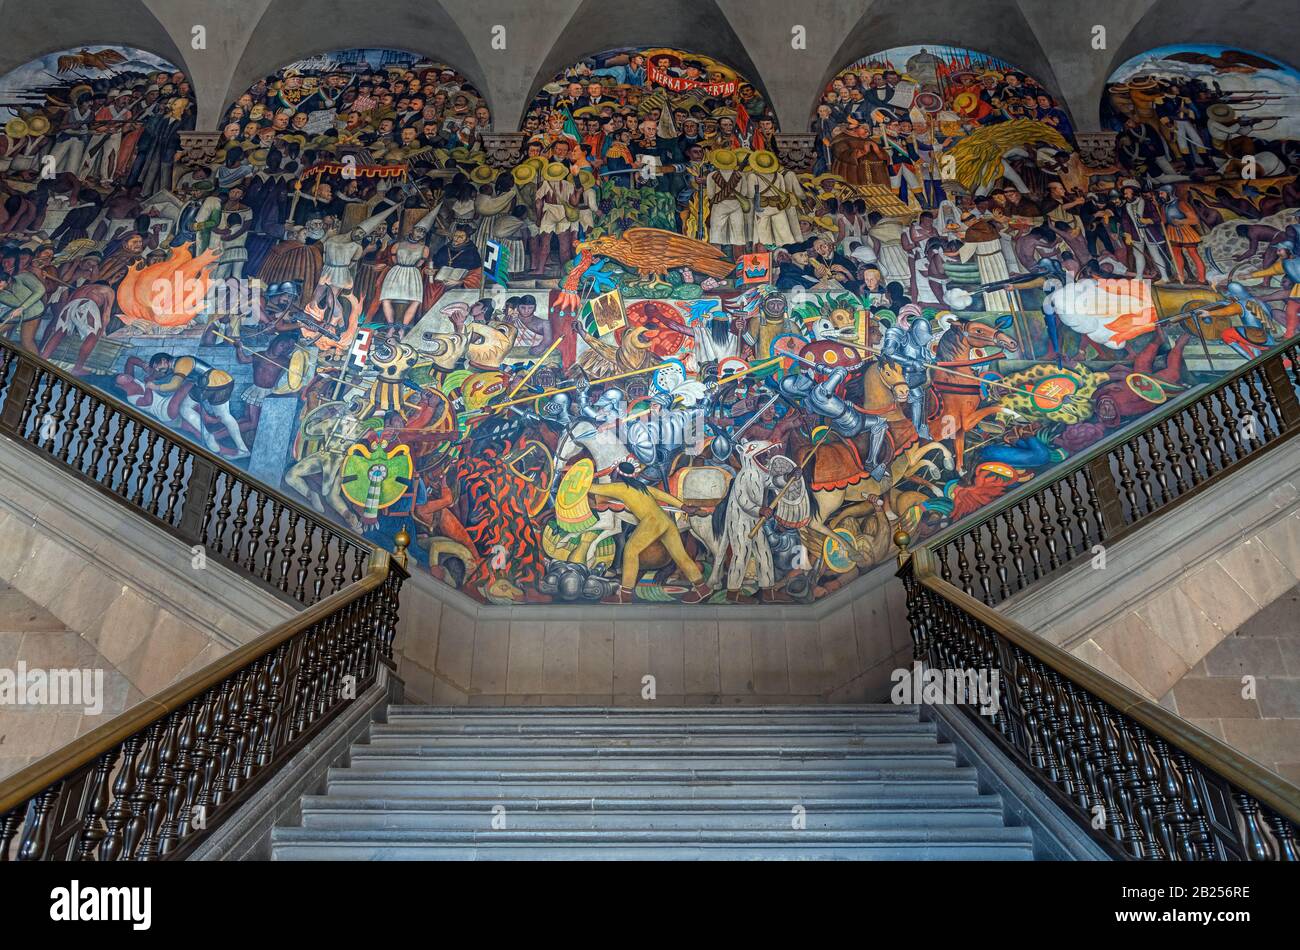 Entrance to the national palace with the history of Mexico, Diego Rivera fresco mural, Mexico City. Stock Photo